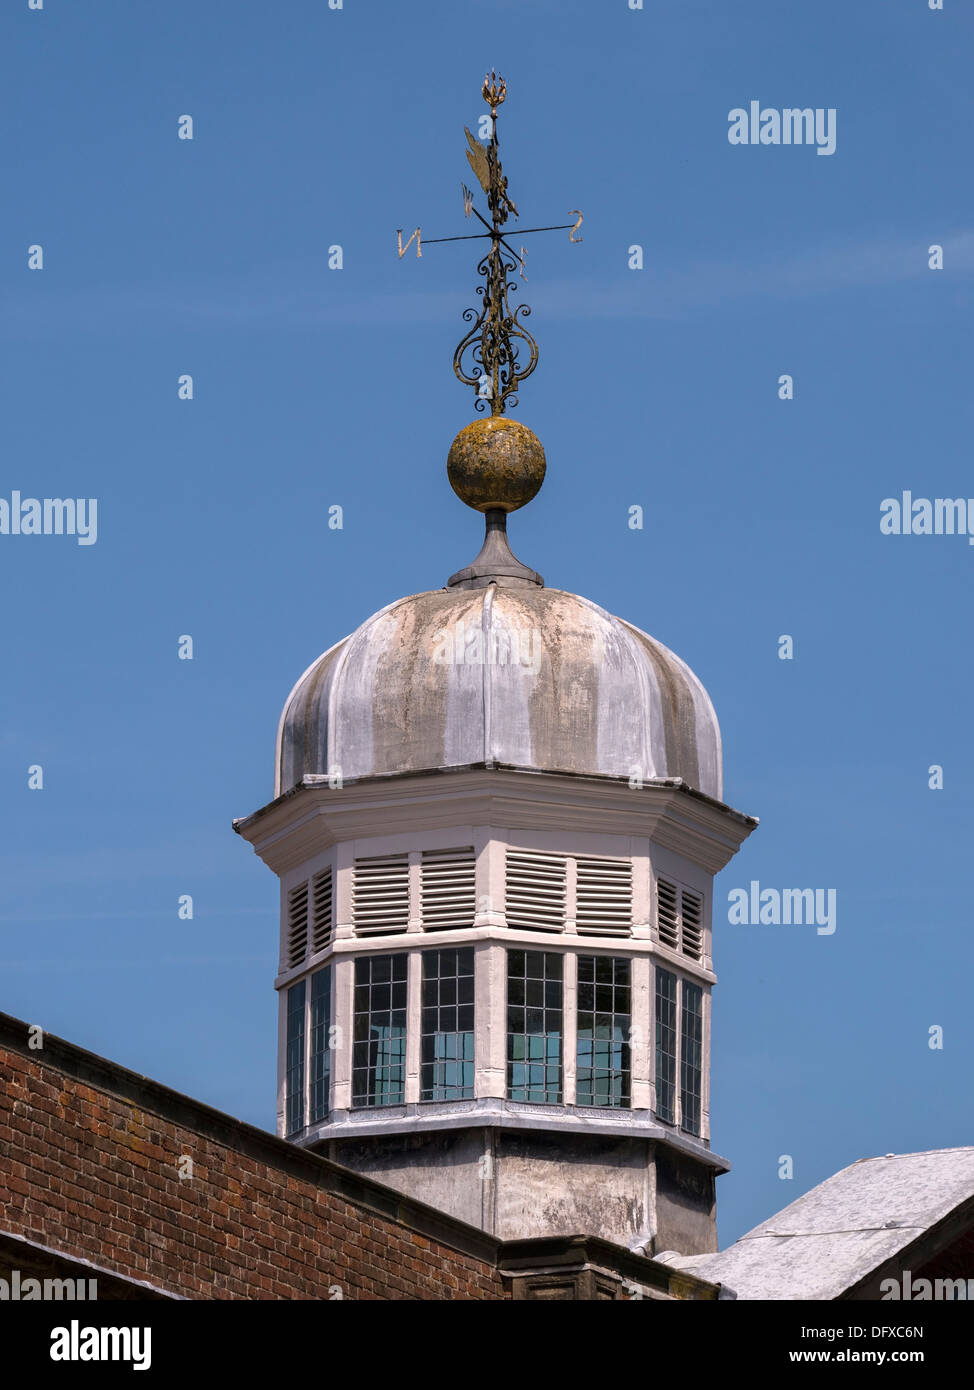 Octagonal cupola with leaded domed roof and ornate weather vane, Calke Abbey Stable block, Ticknall, Derbyshire, England, UK Stock Photo